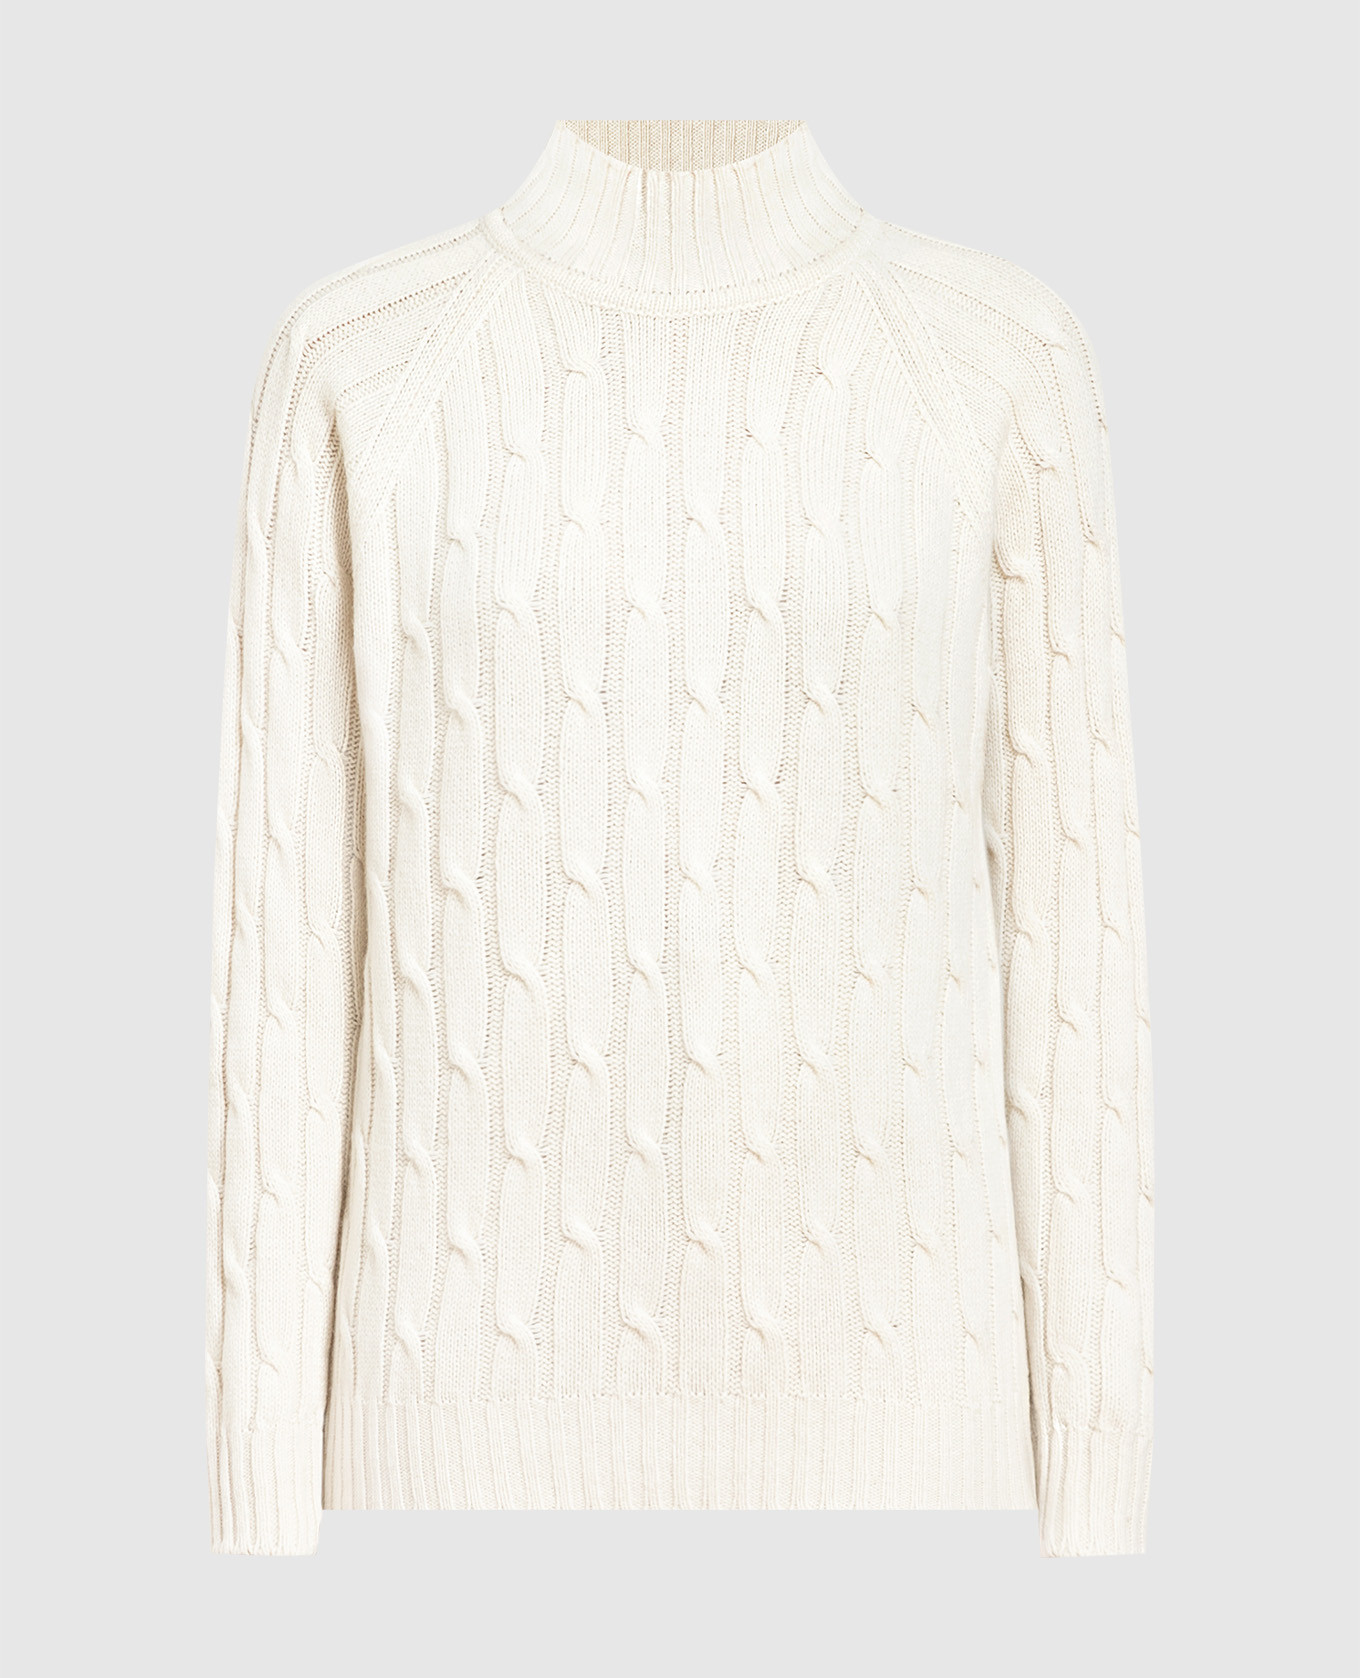 White sweater made of cashmere in a textured pattern